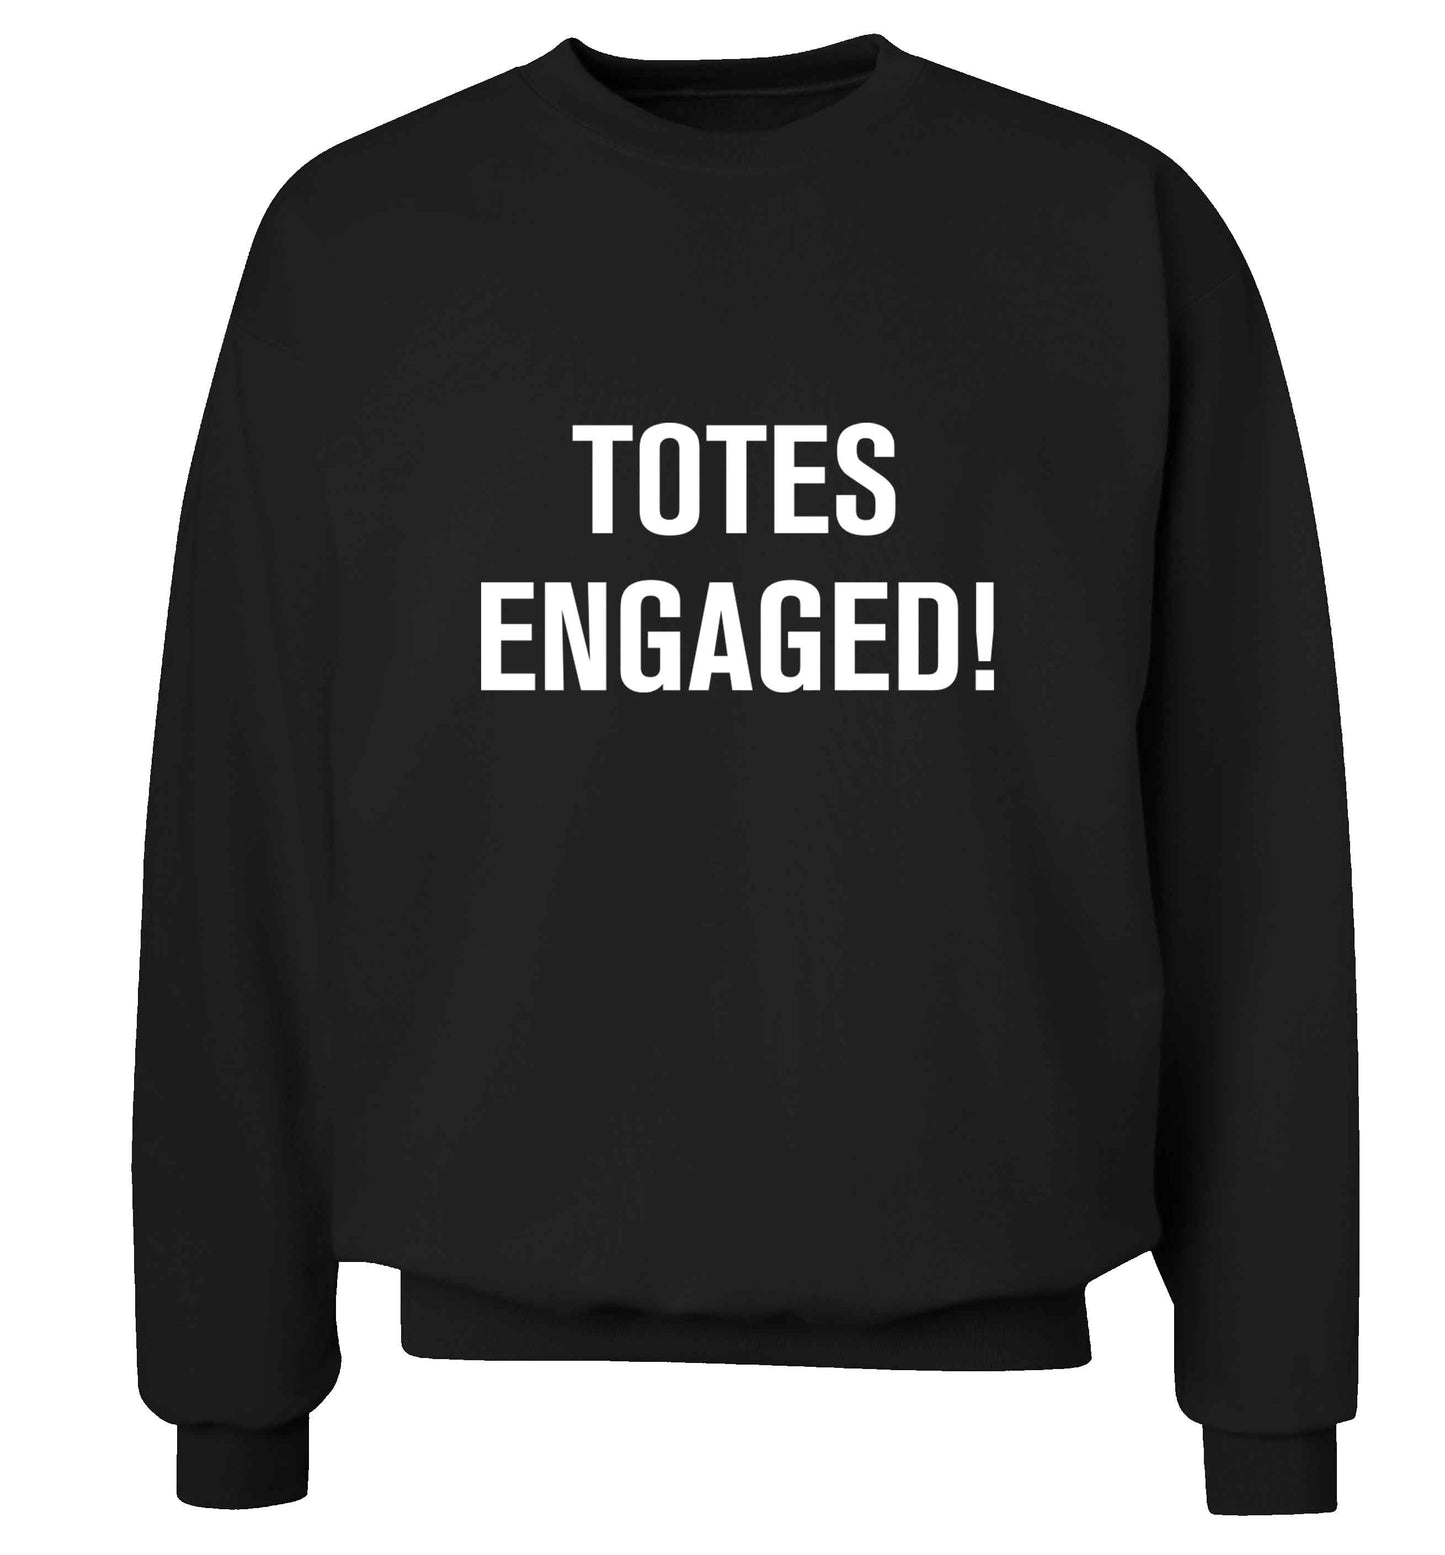 Totes engaged adult's unisex black sweater 2XL